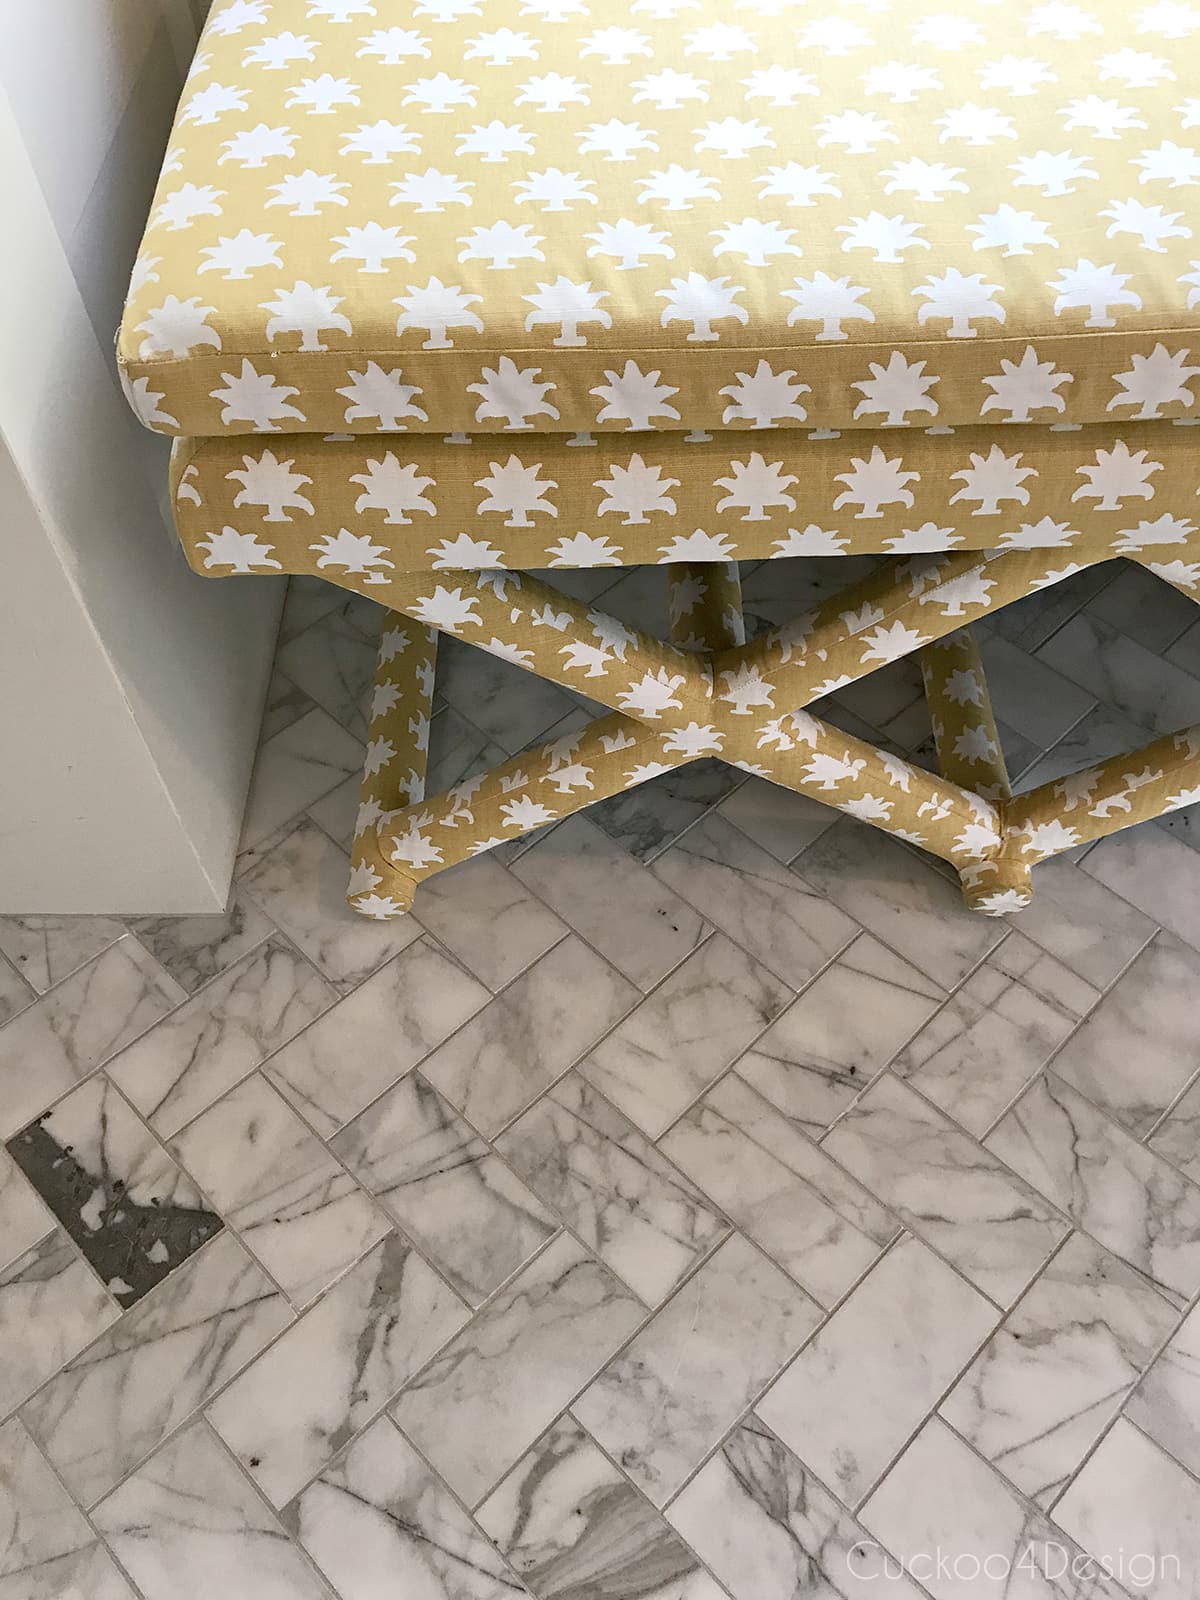 x-bench upholstered with Mally Skok Flora Too Custurd fabric in marble master bathroom